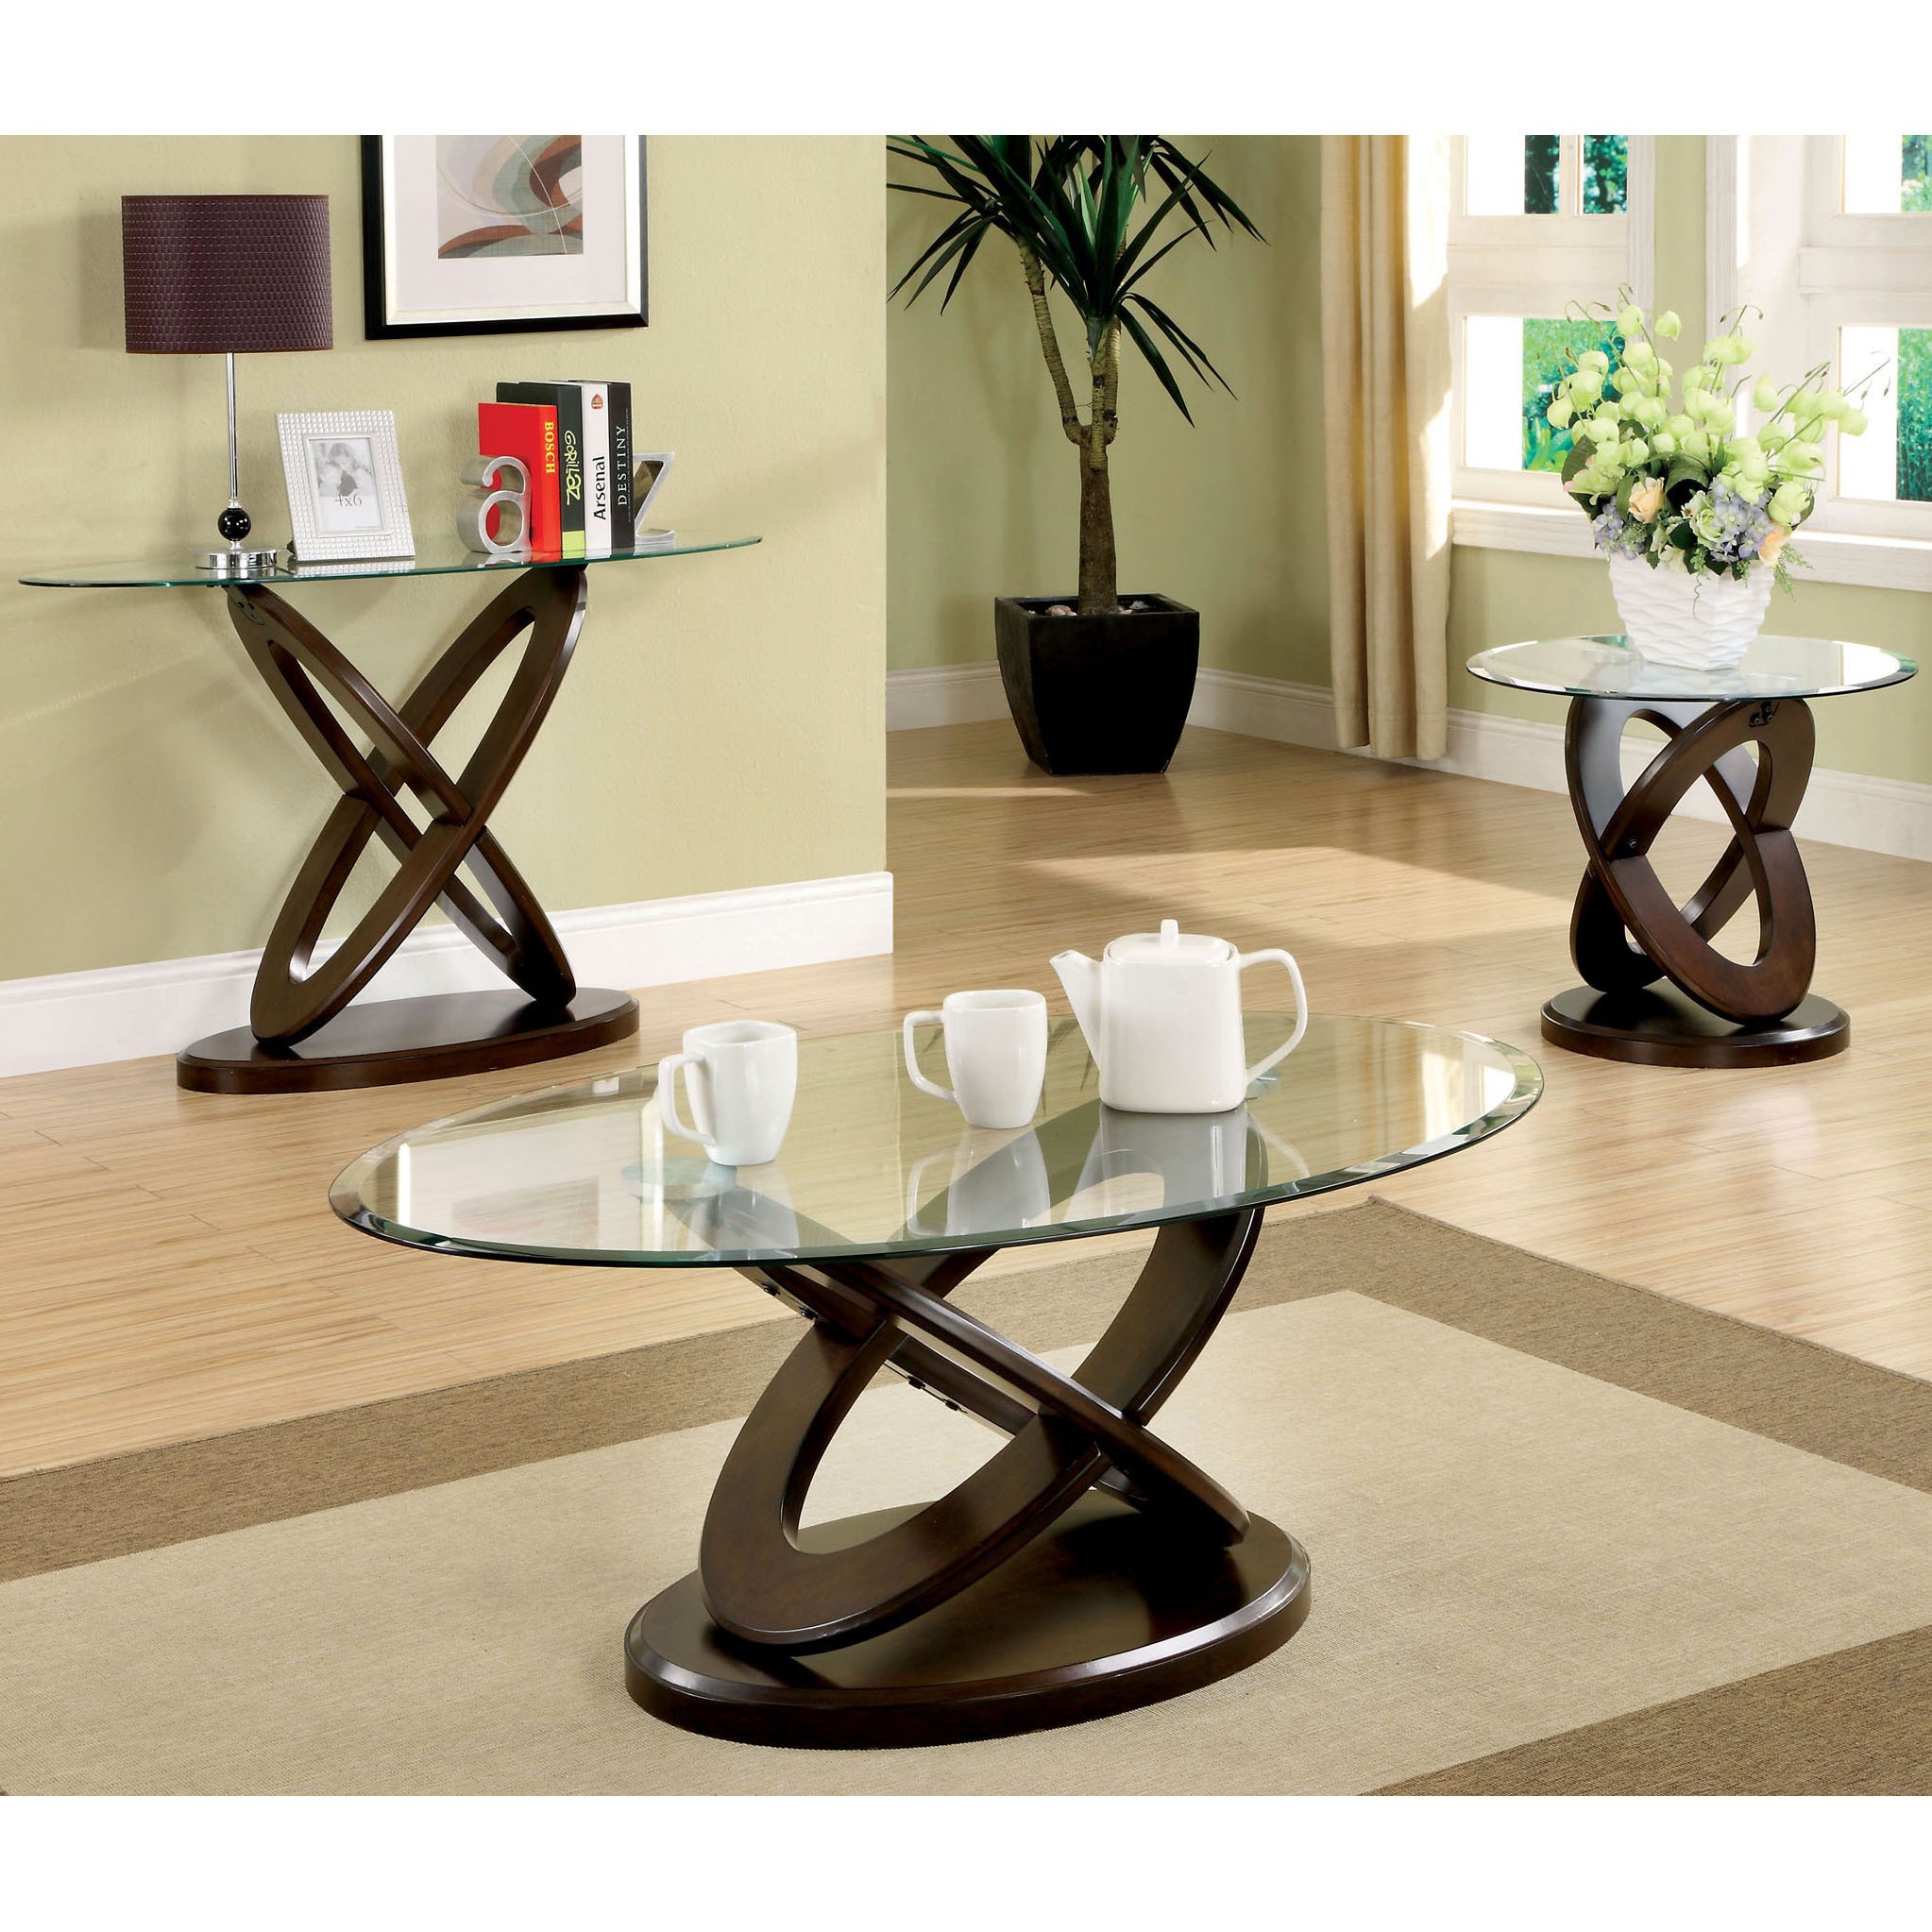 furniture america evalline piece dark walnut accent table set free shipping today cute tablecloths runner patterns garden stool glass drawer pulls west elm shades commercial nic